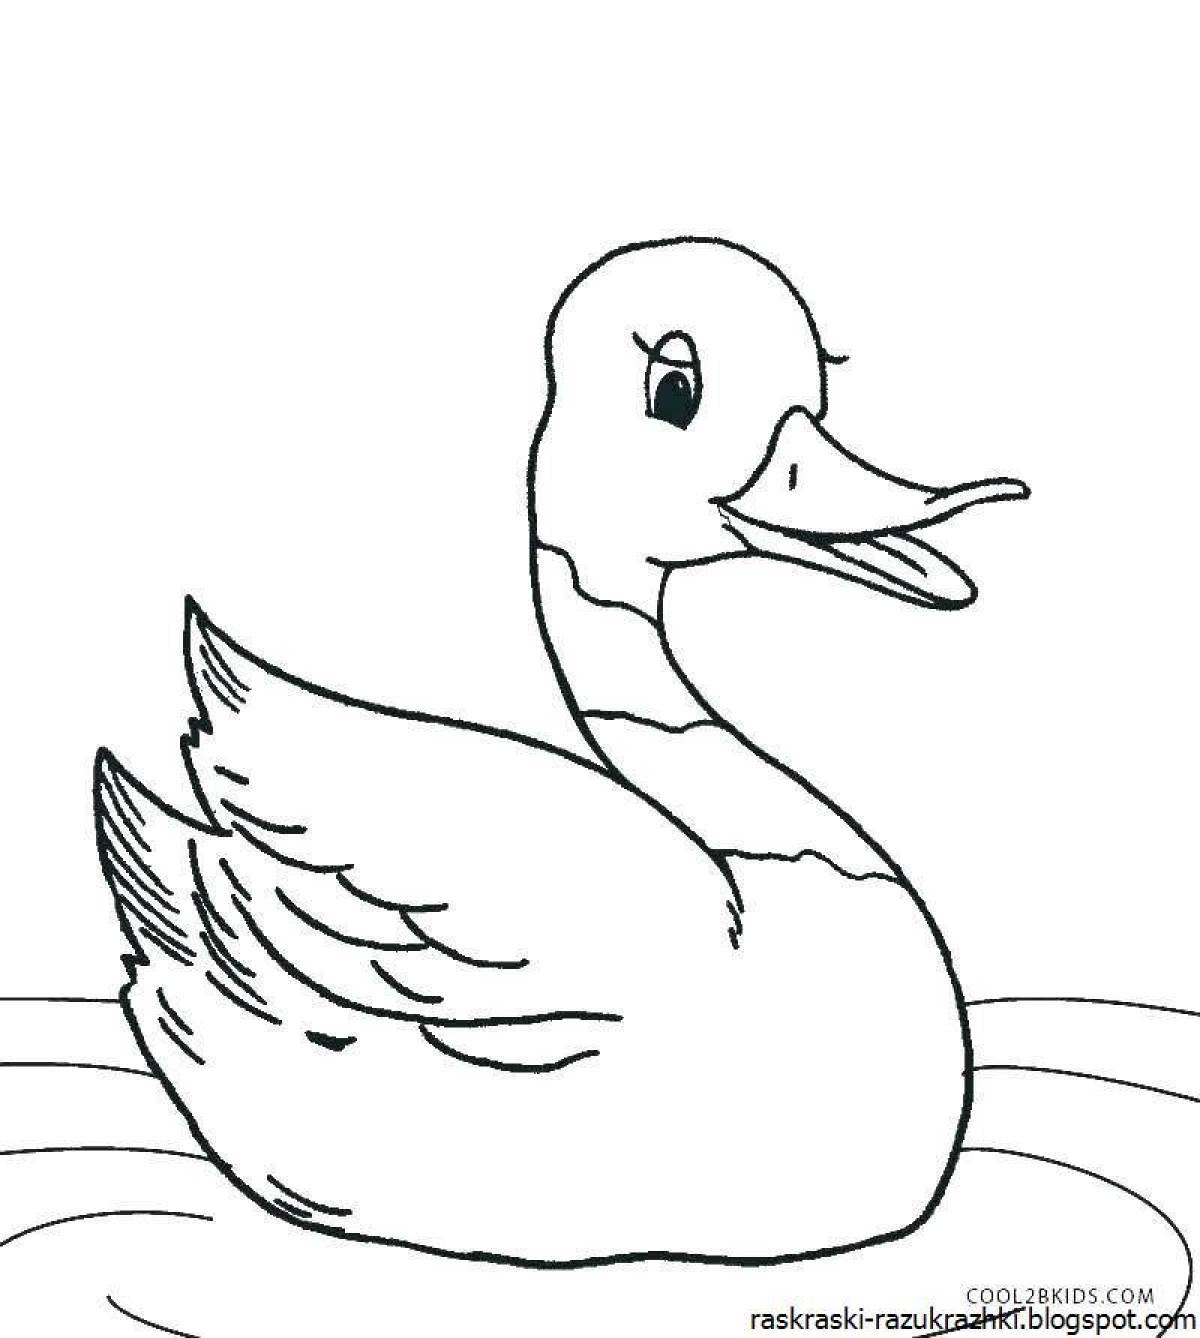 Silly duck coloring book